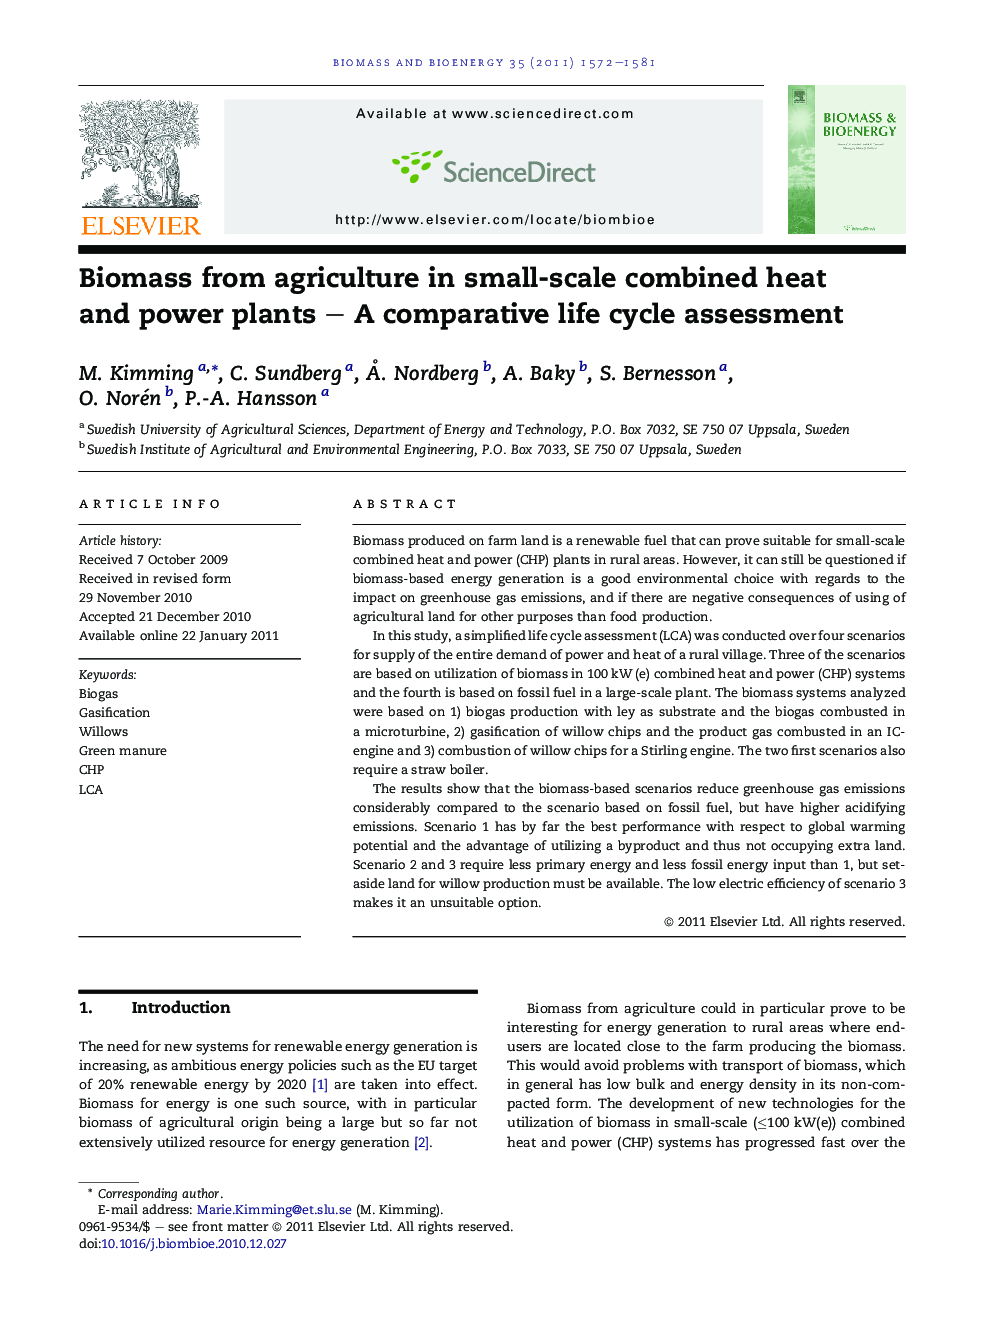 Biomass from agriculture in small-scale combined heat and power plants - A comparative life cycle assessment